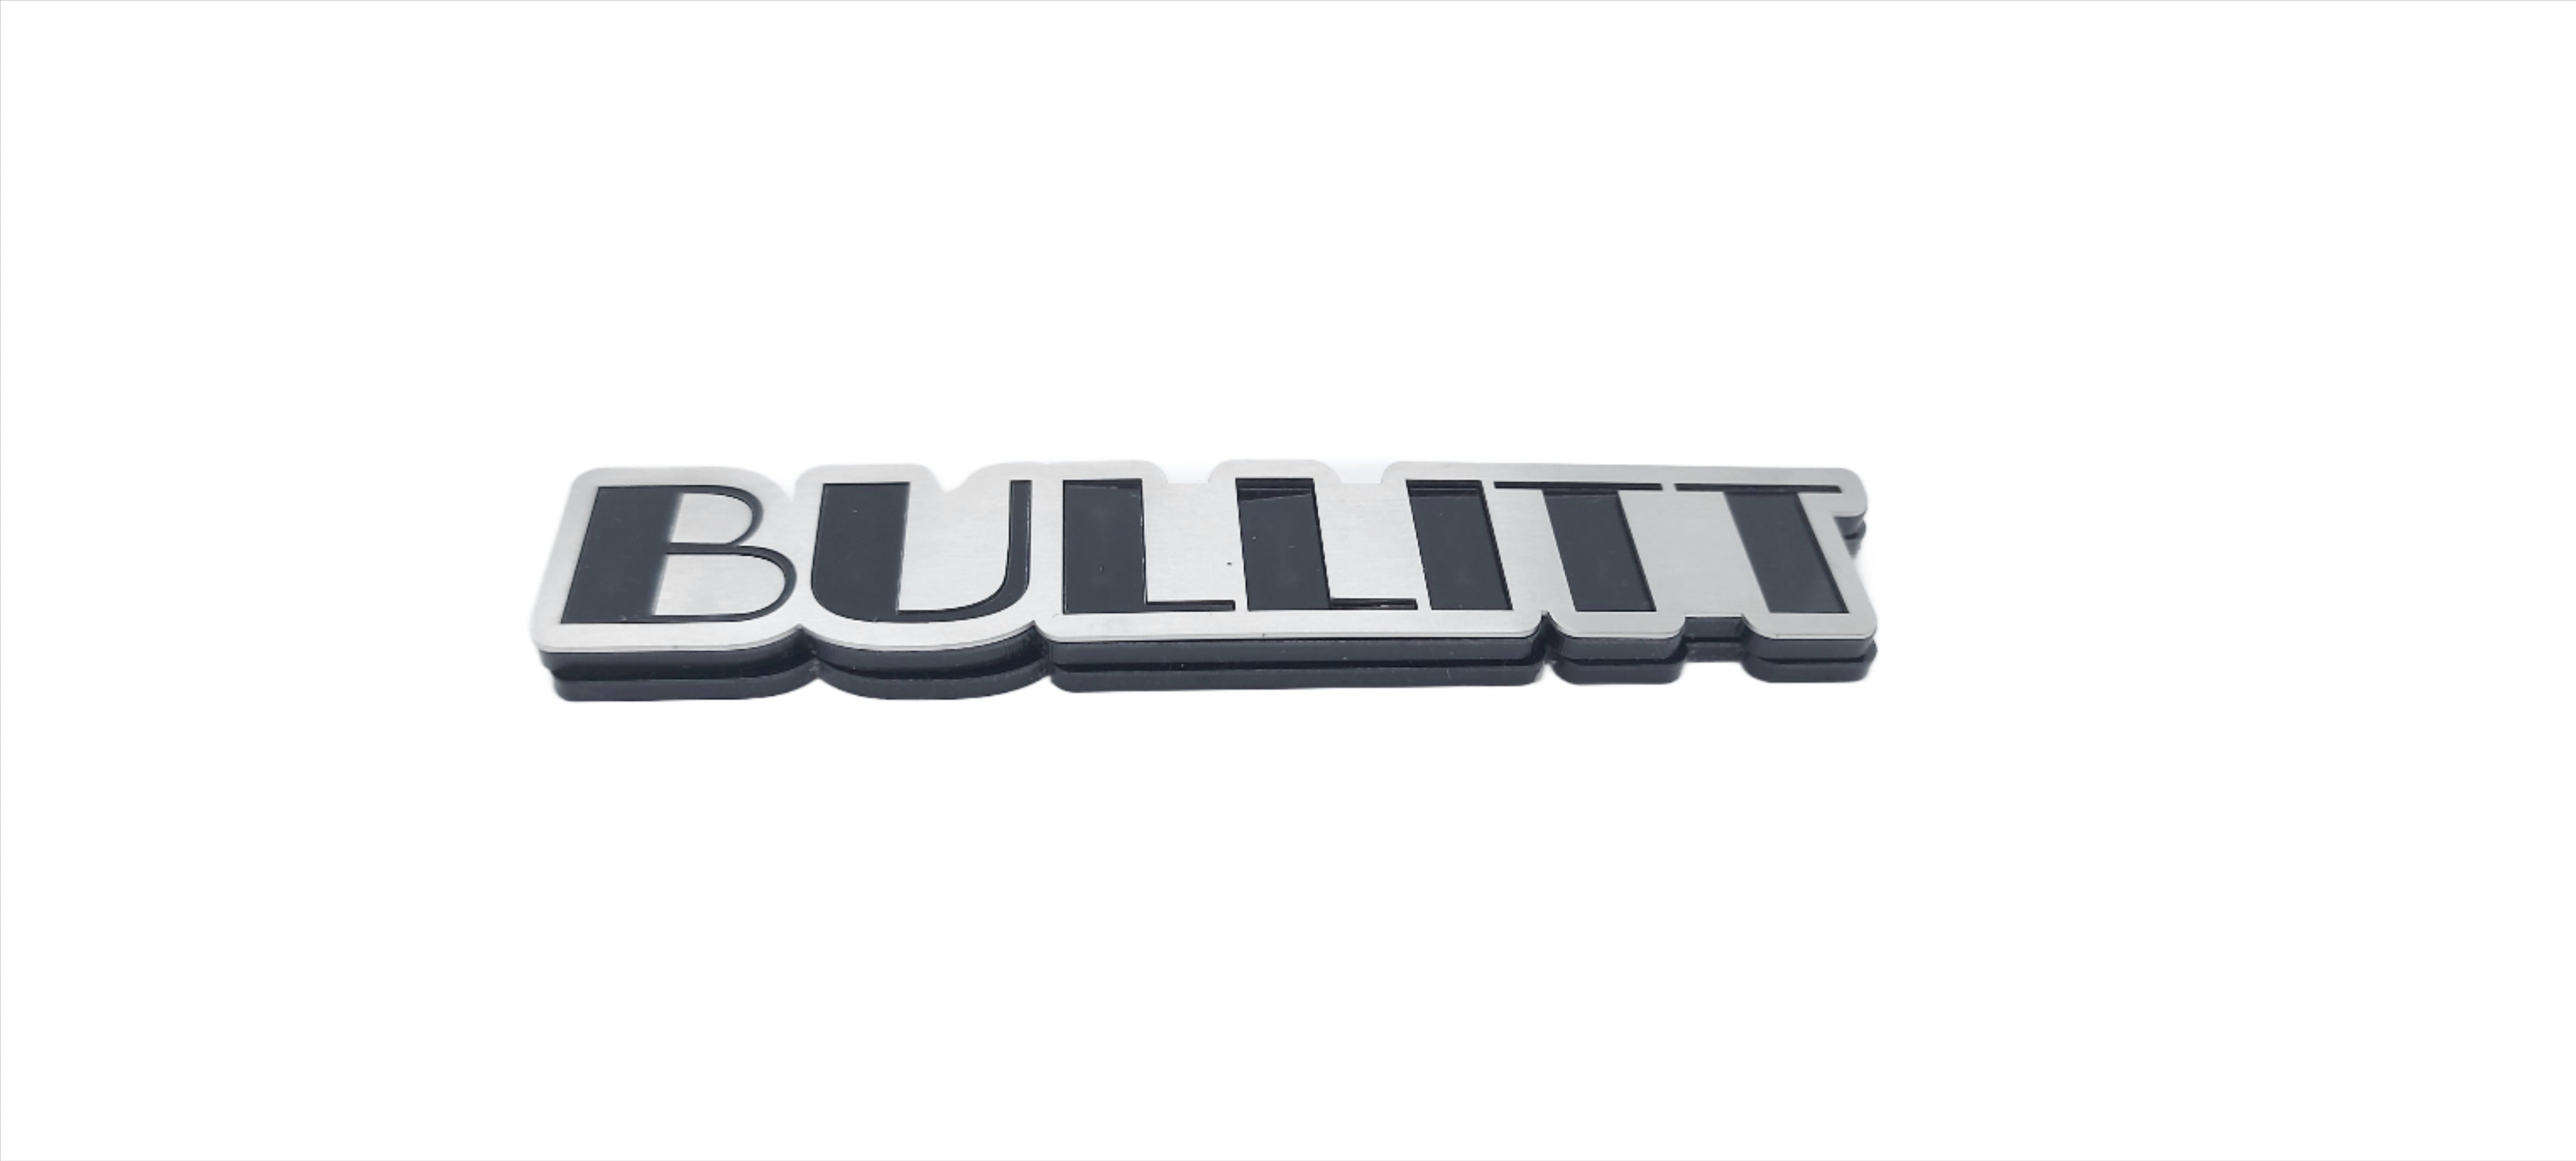 Ford Mustang stainless steel Radiator Grille emblem with Bullitt logo (type 3) - decoinfabric